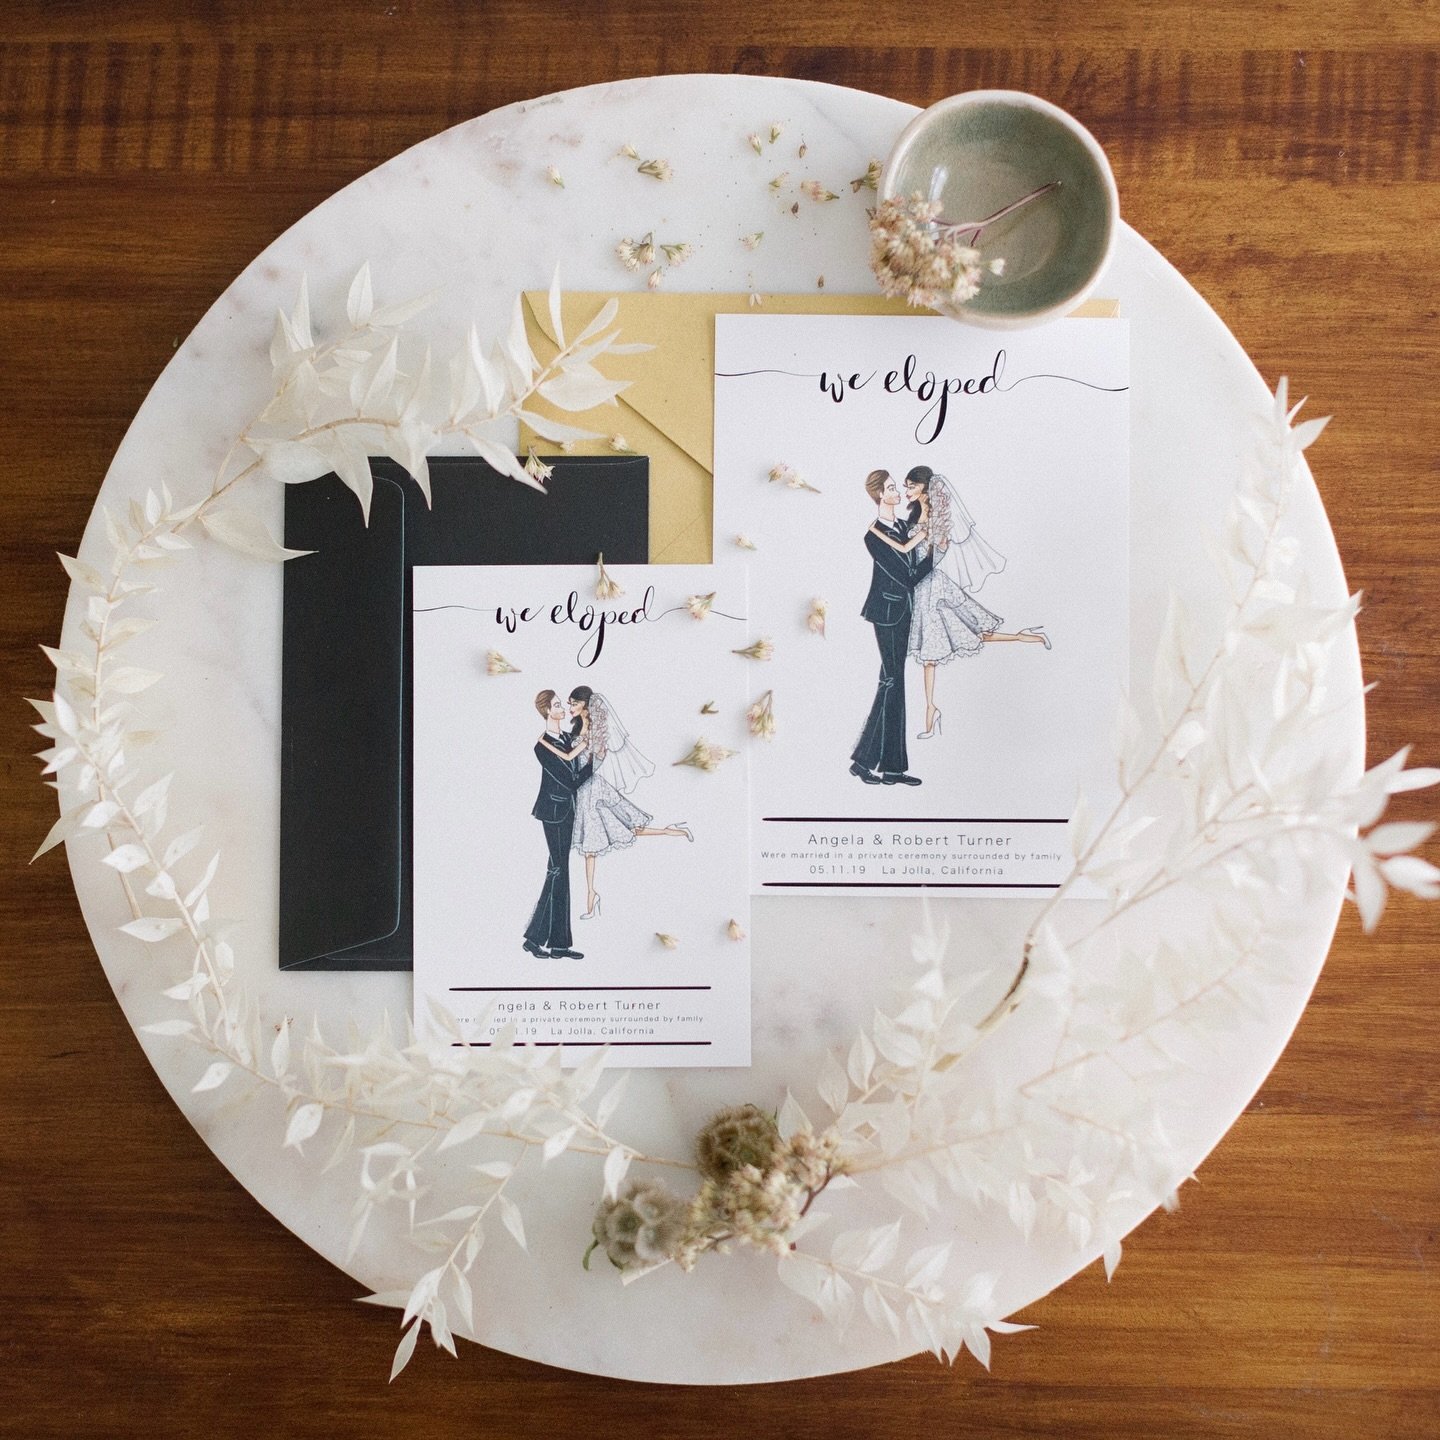 Make your event truly unique and order your custom invitations/annoucements, menu or cocktail signs, thank you cards, and more! 

Don&rsquo;t settle for ordinary when you can have extraordinary! 

Do you prefer generic stationery for your event or cu